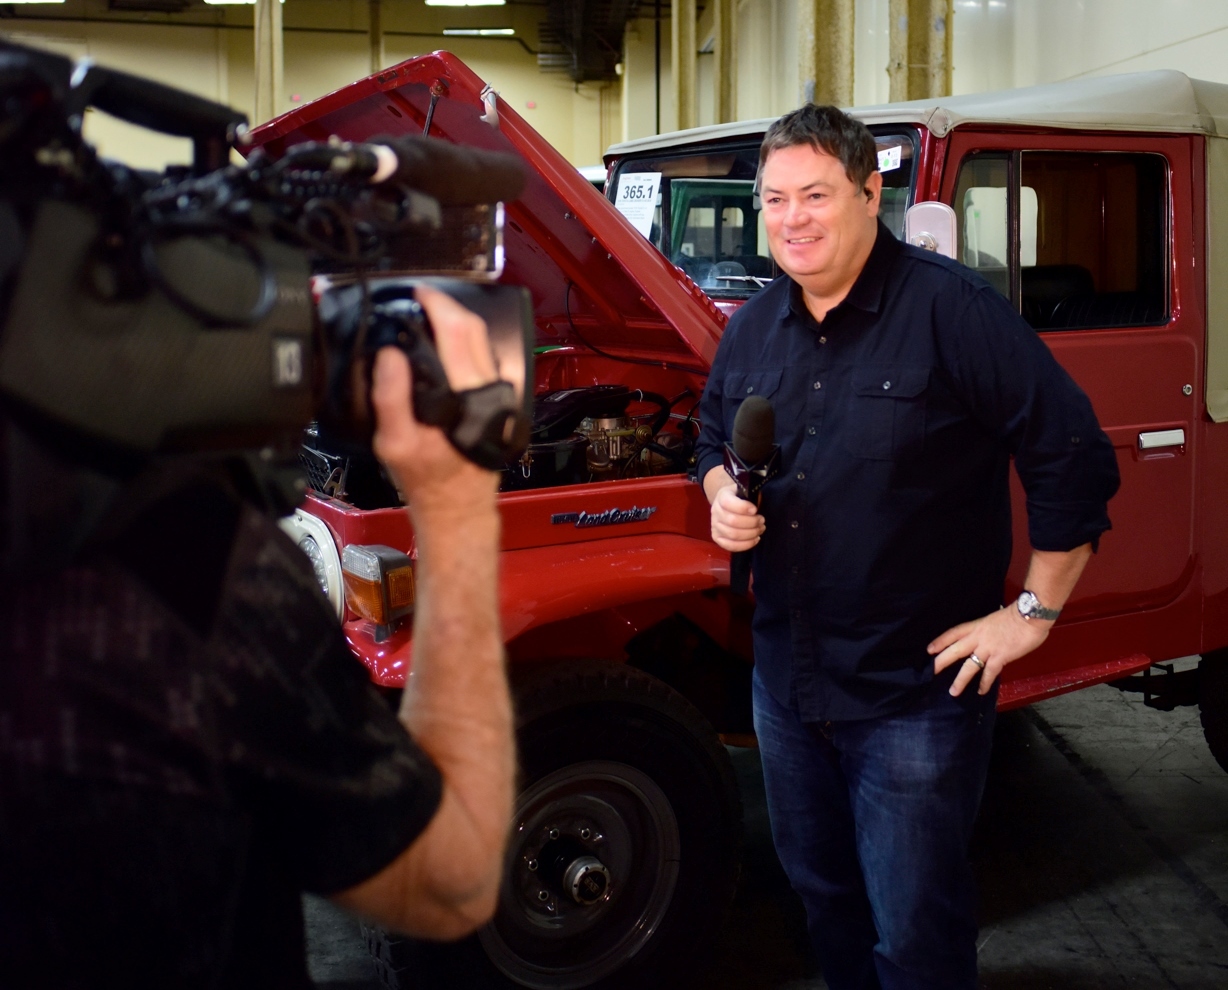 Mike Brewer from "Wheeler Dealers" during a "Barrett-Jackson Live" broadcast.